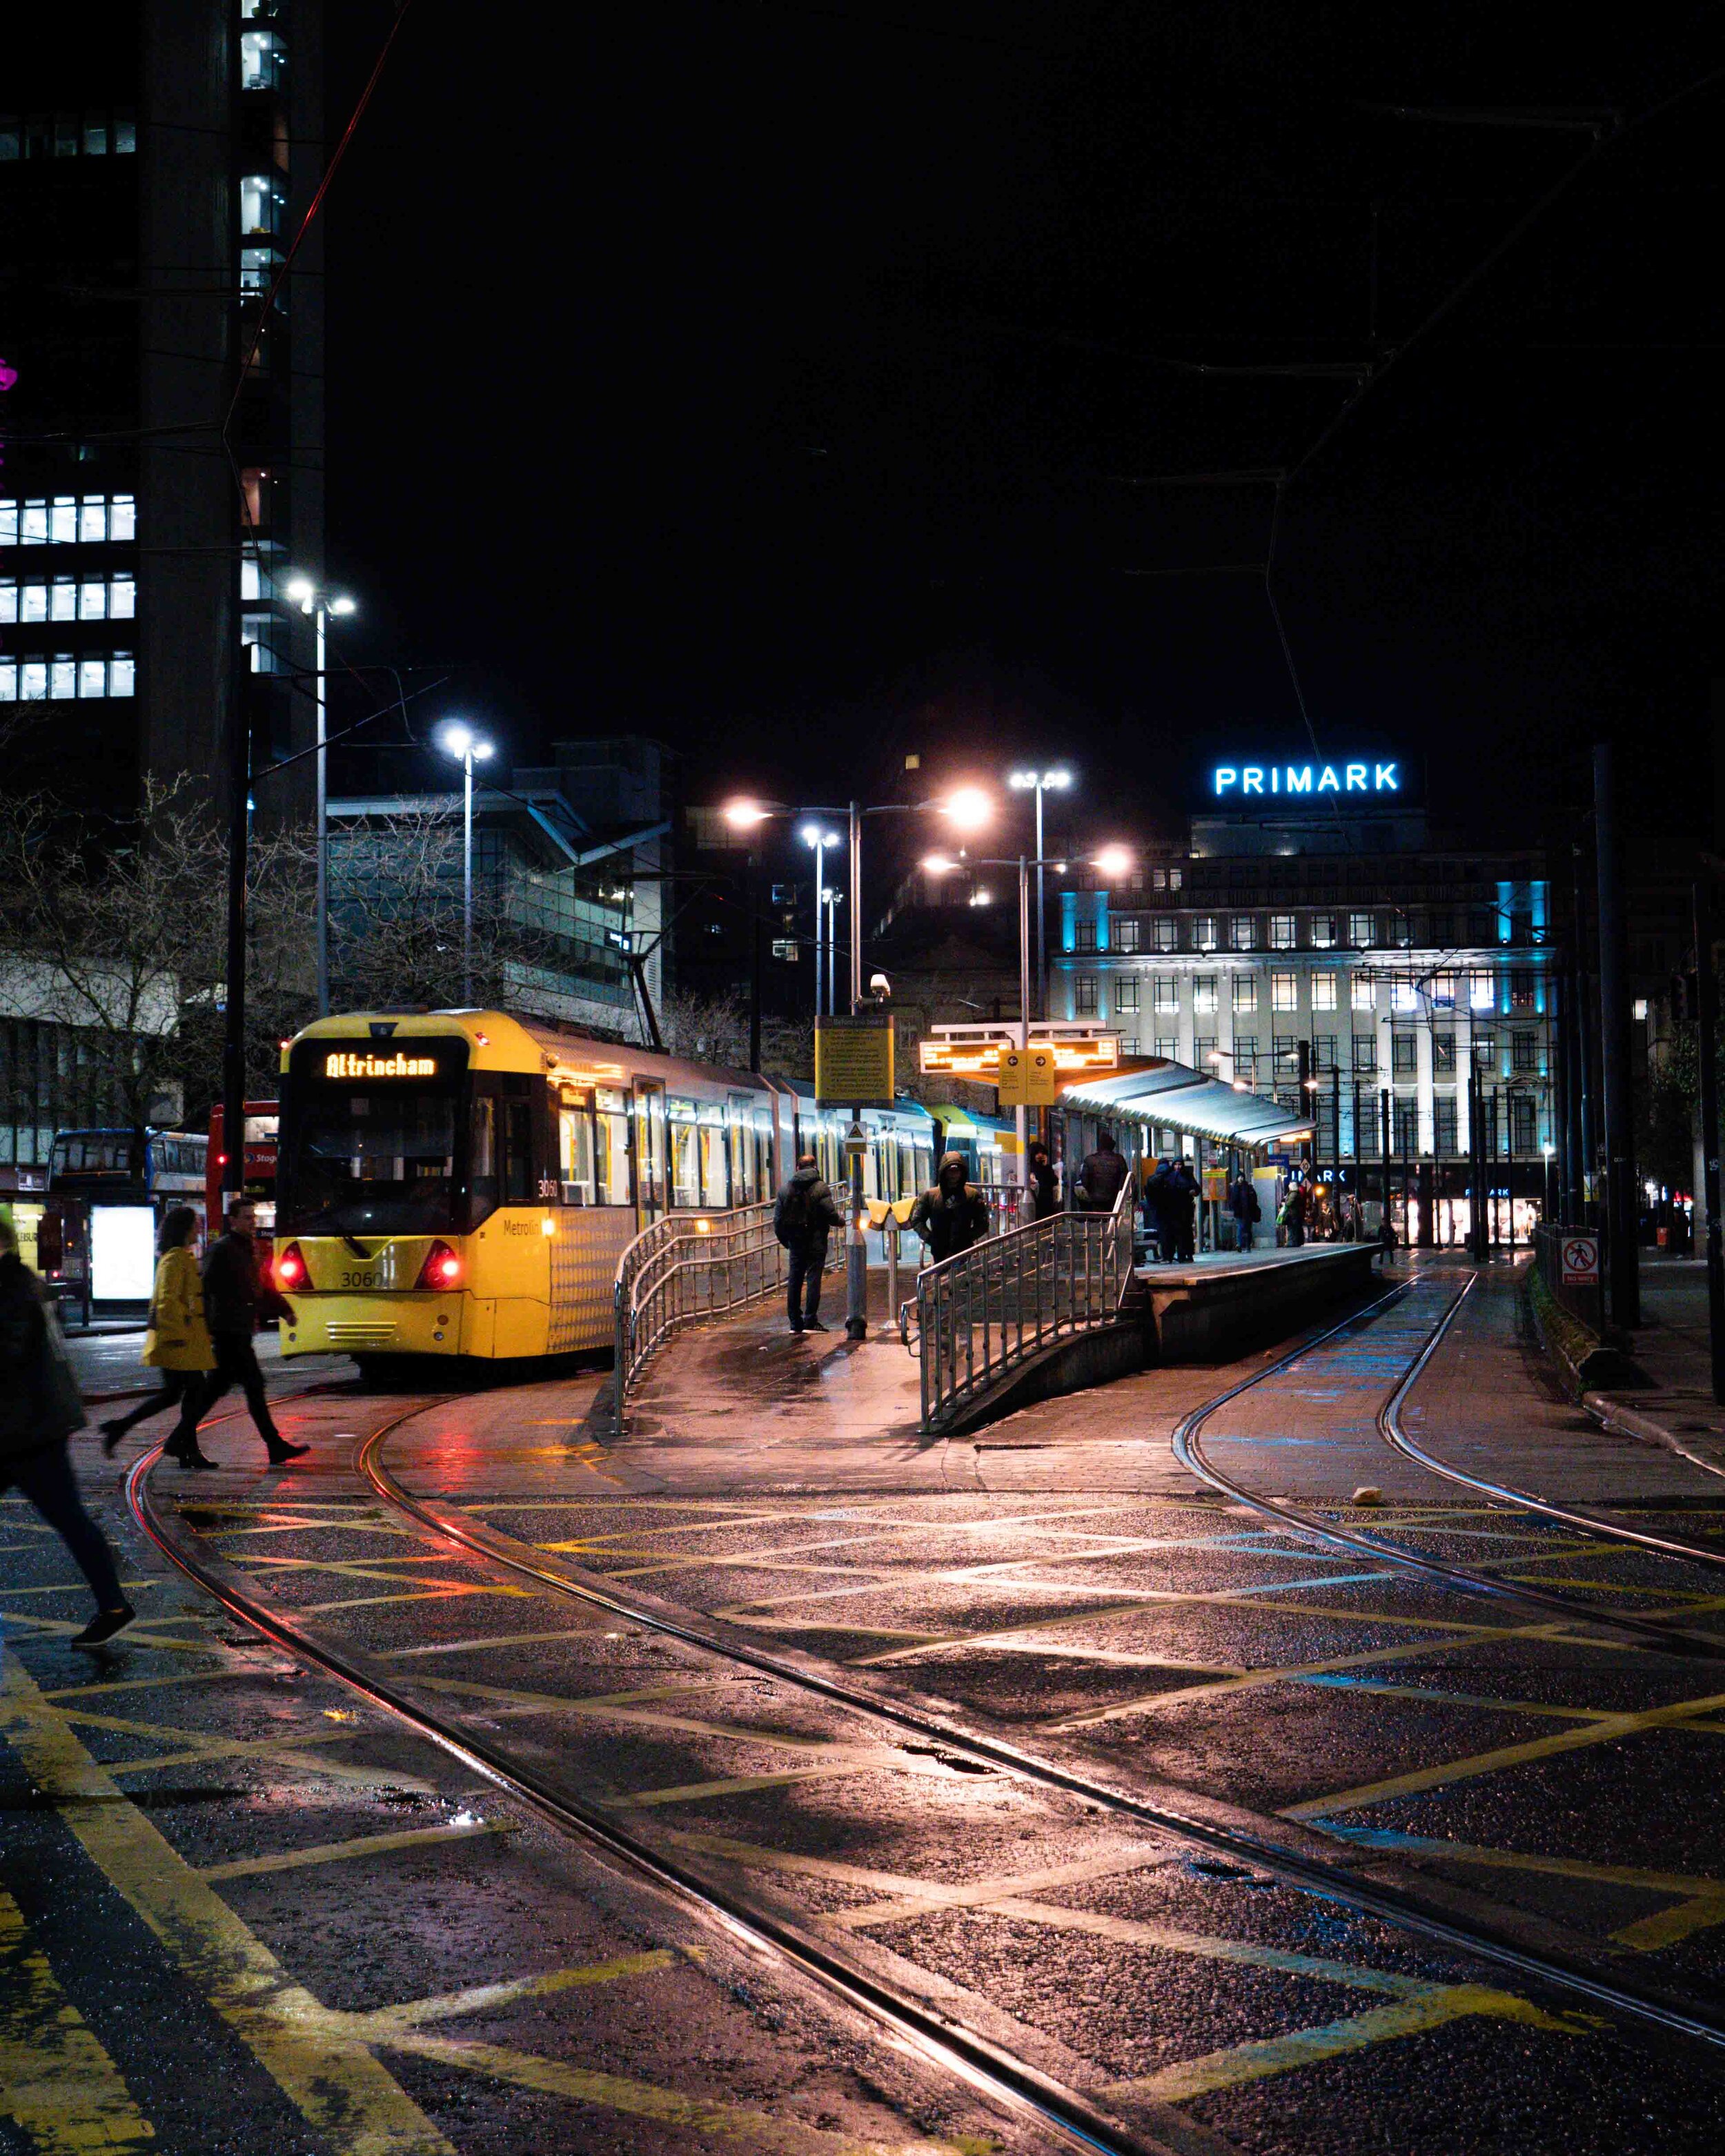 Manchester Piccadilly tram stop at night with a yellow tram picking up passengers, free stock photography.jpg